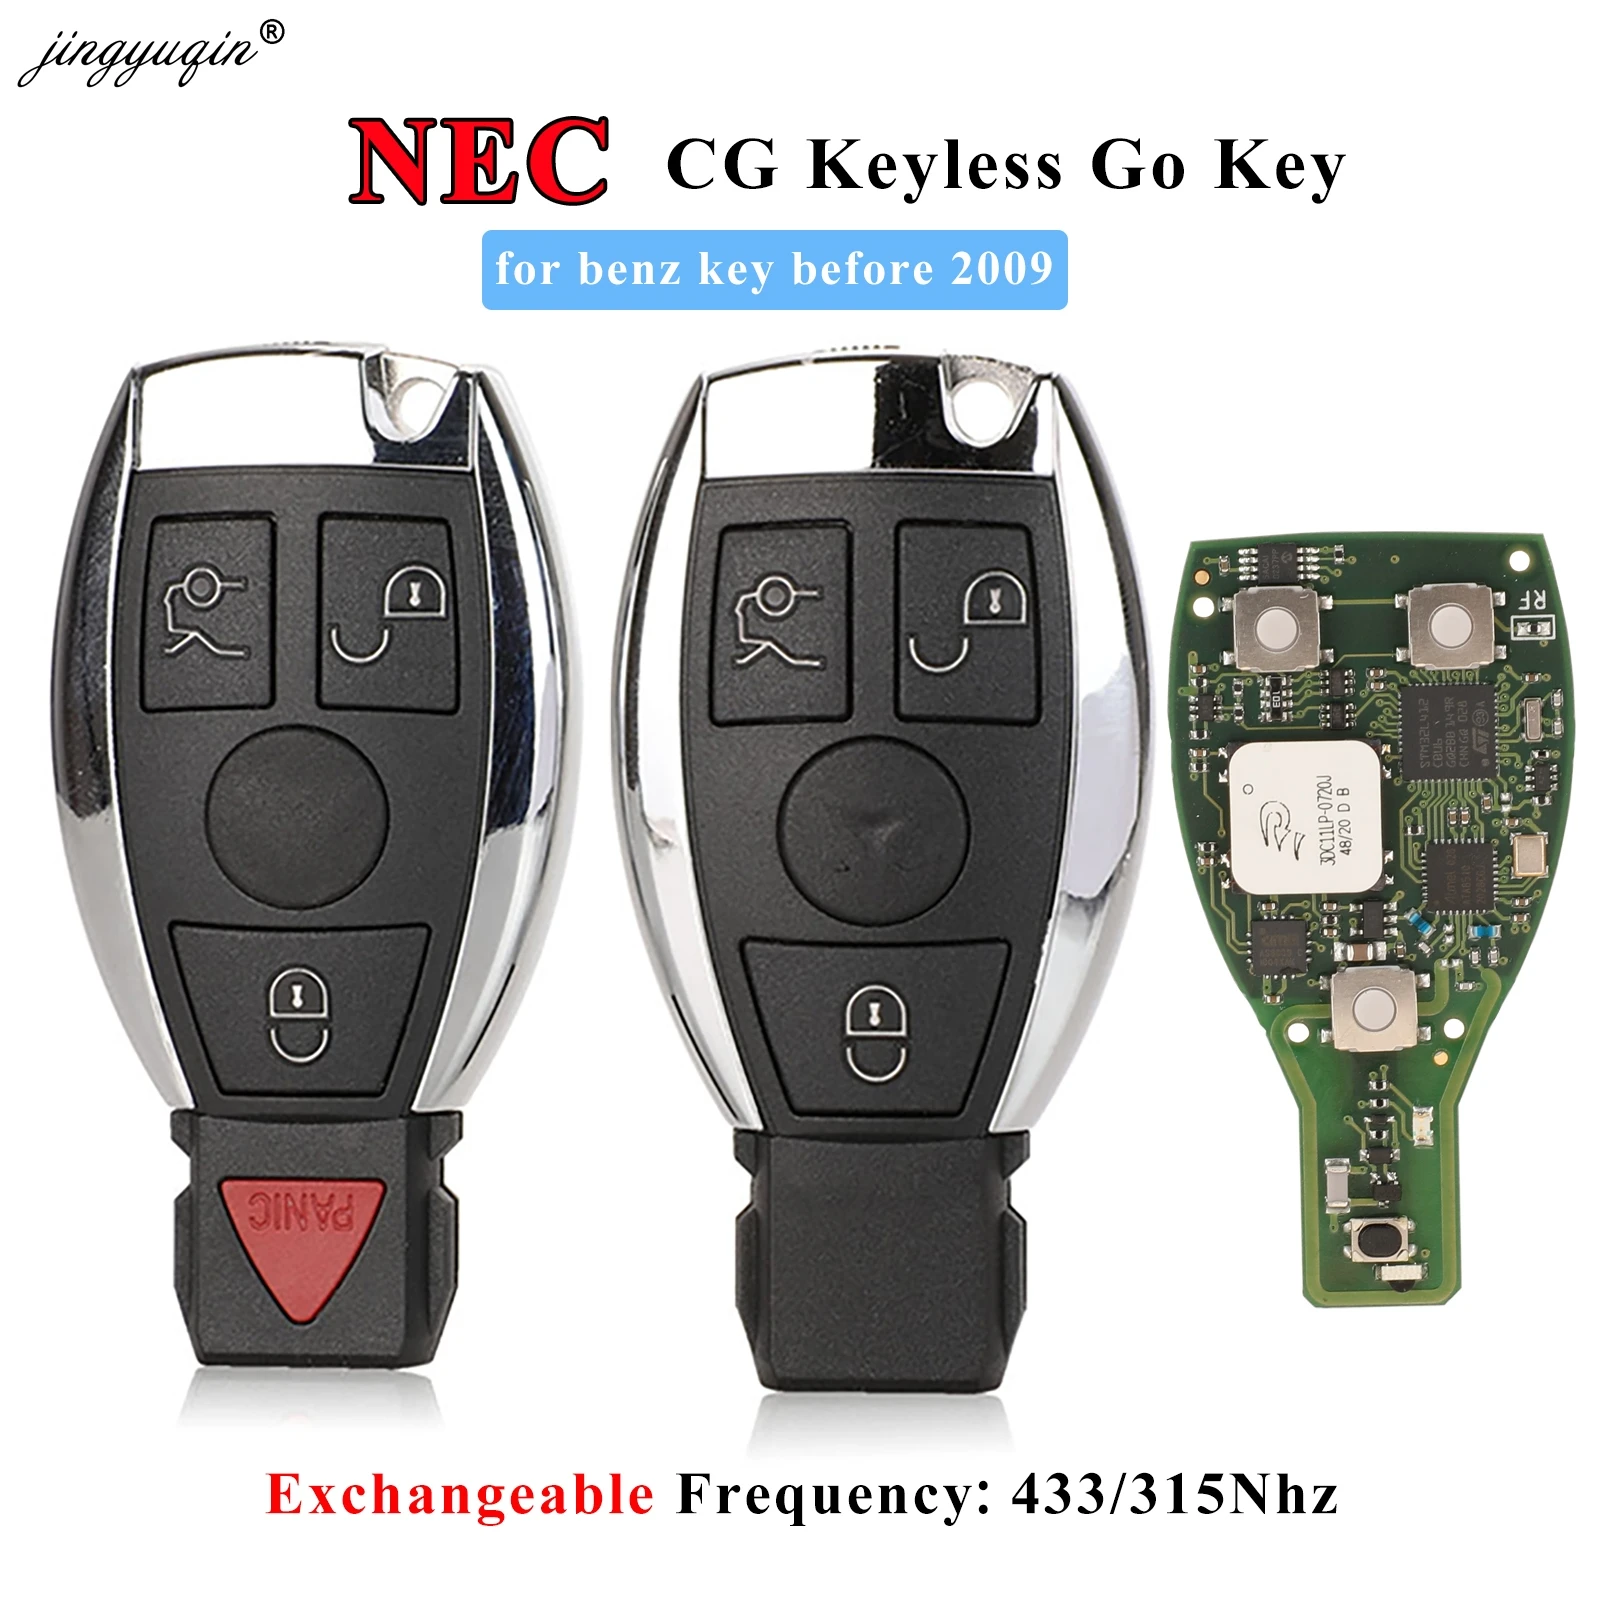 

jingyuqin NEC Keyless go Remote Key Fob 3 Button BGA style Upgrade for-Mercedes-Benz before 2009 315mhz 433MHz Exchanged CG